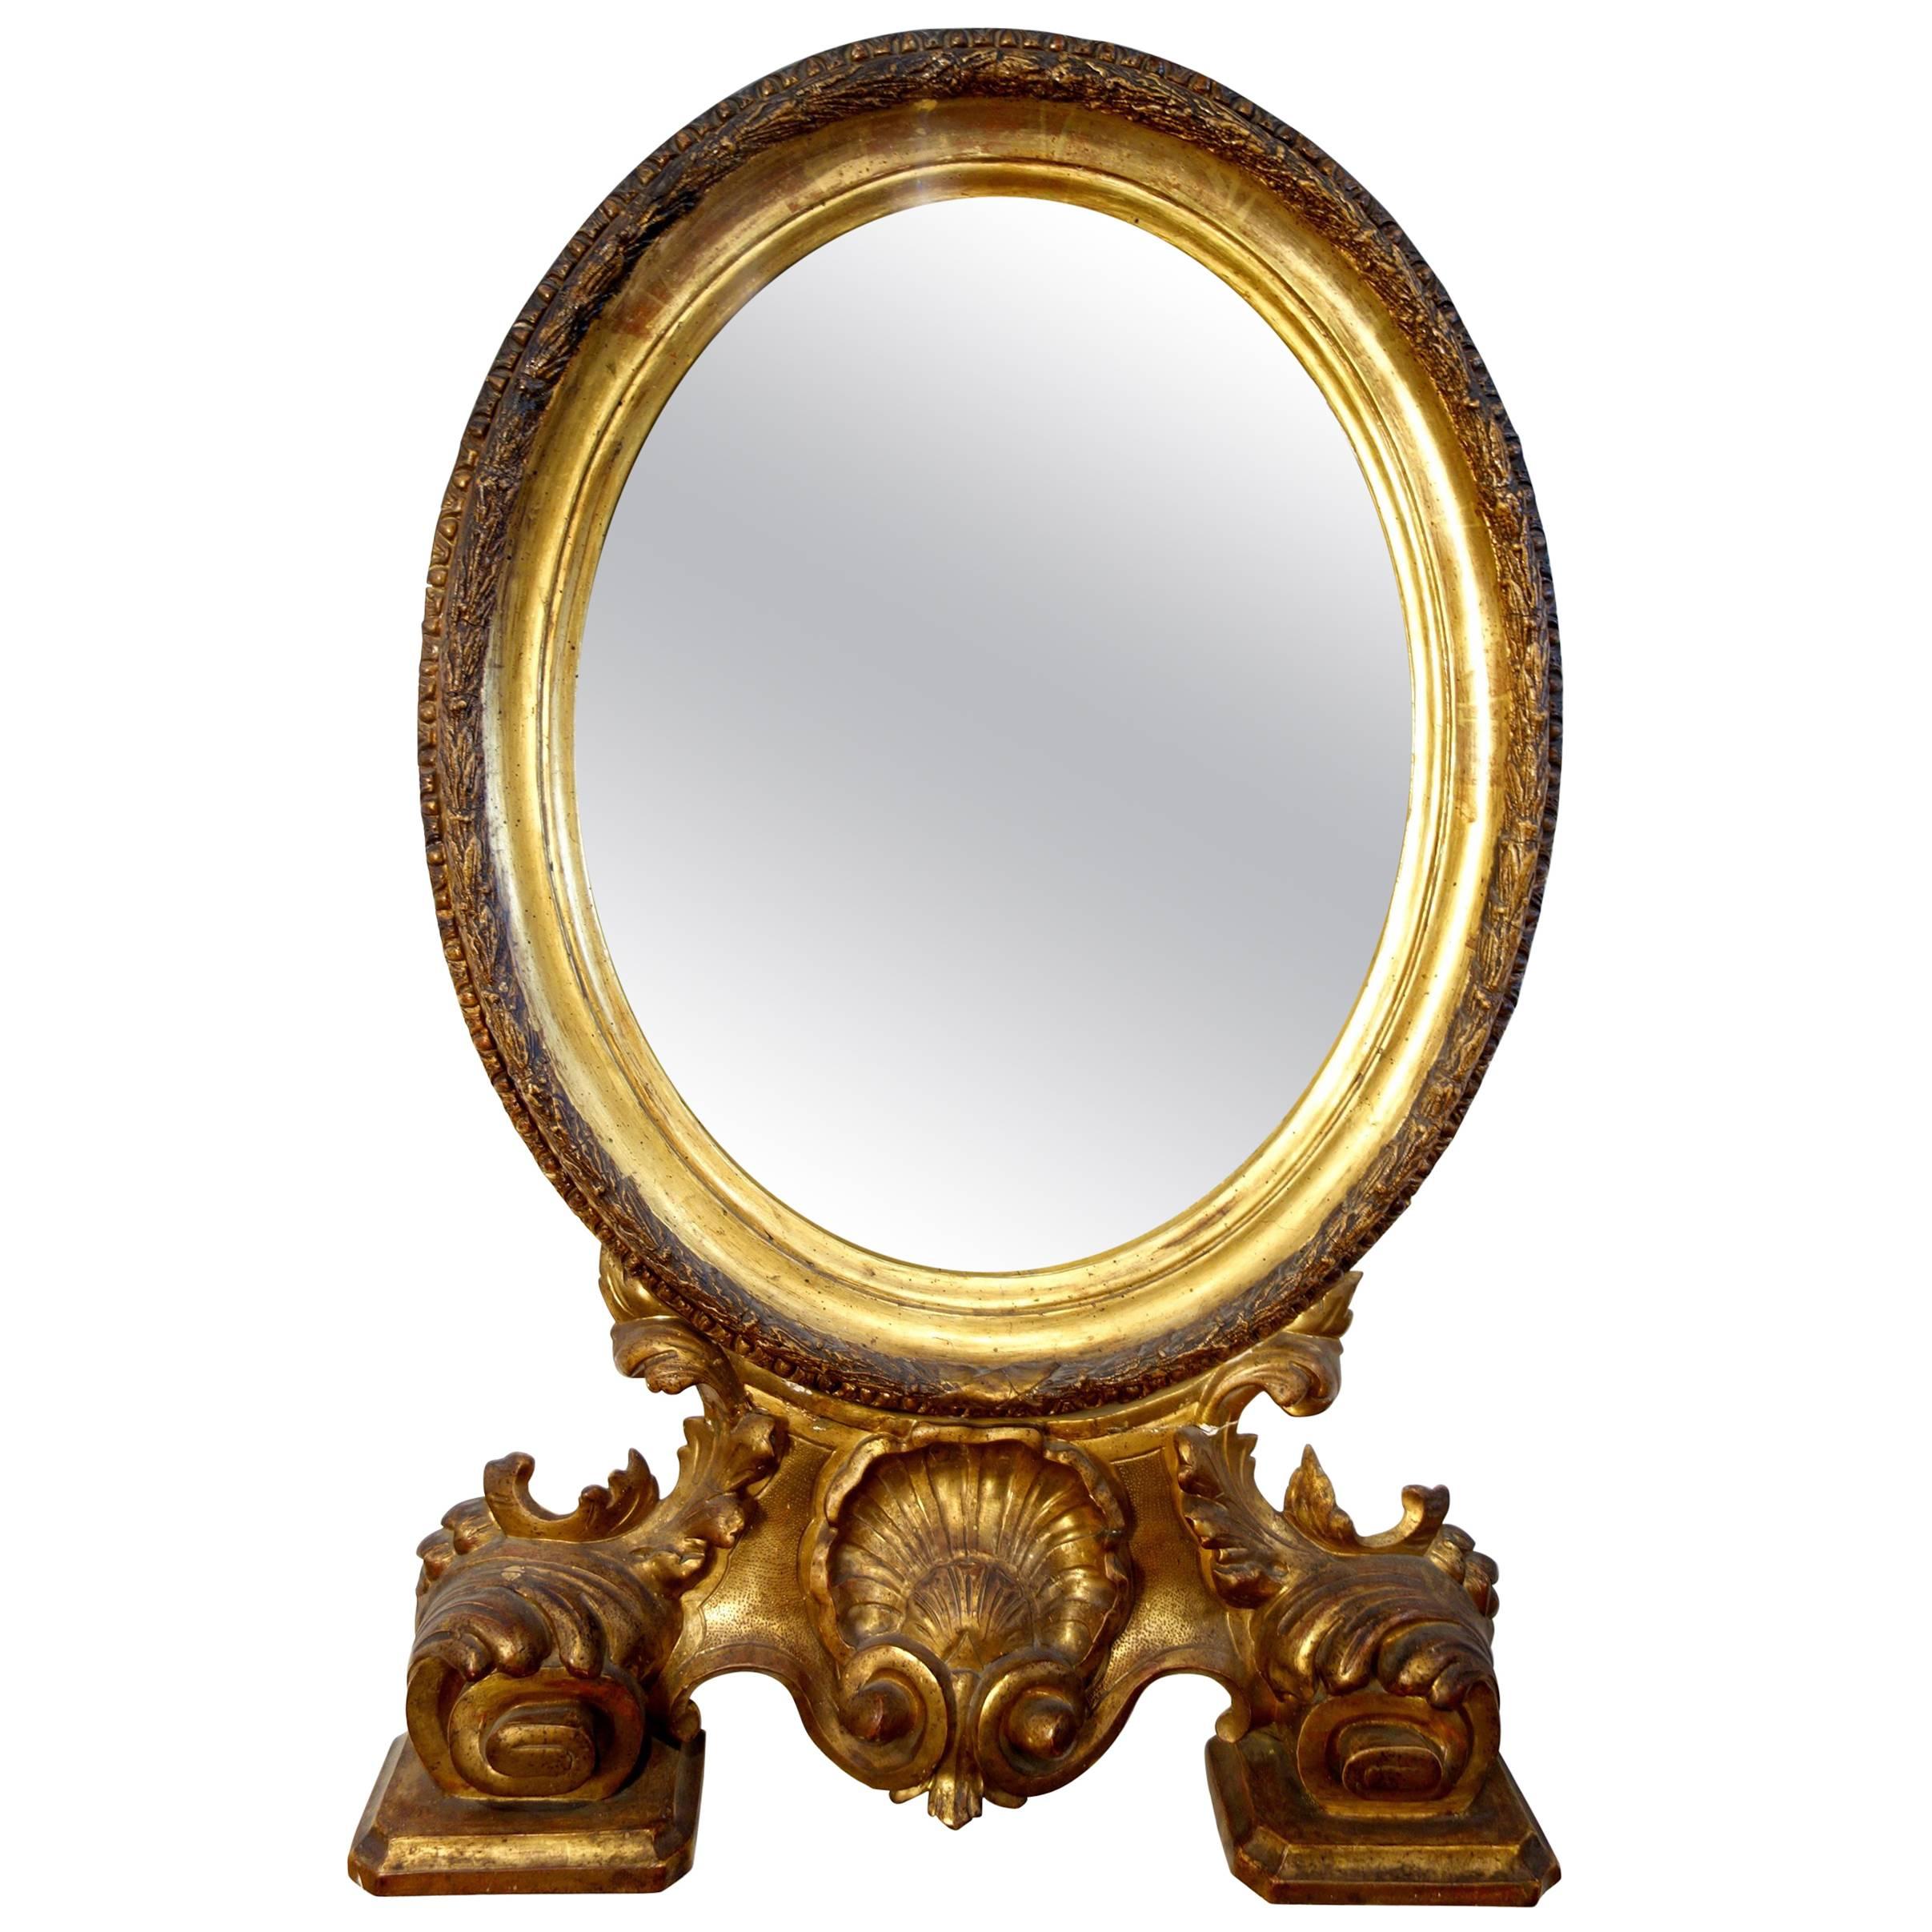 19th Century Antique Italian Baroque Style Oval Gold Gilded Mirror